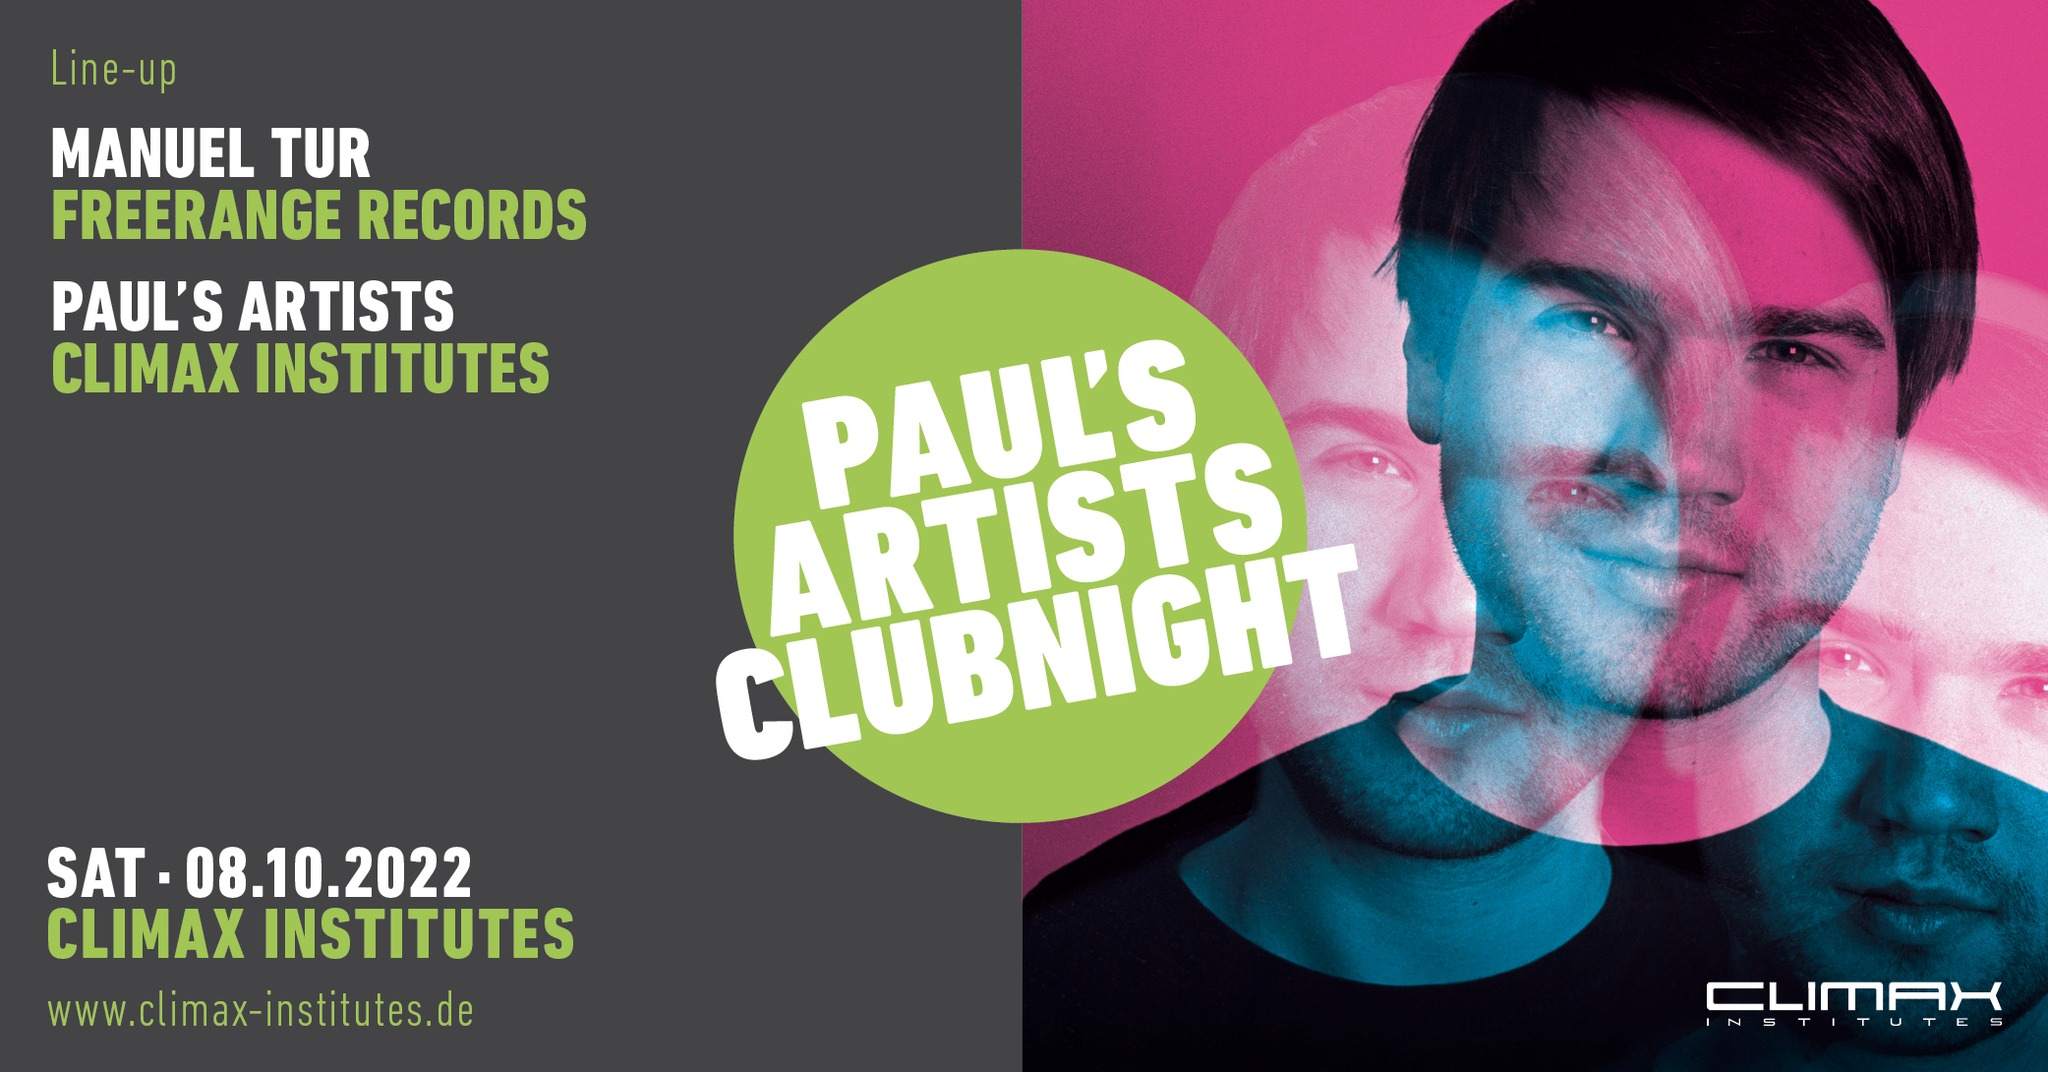 PAUL`S ARTISTS CLUBNIGHT with Manuel Tur (Freerange Records) - フライヤー表